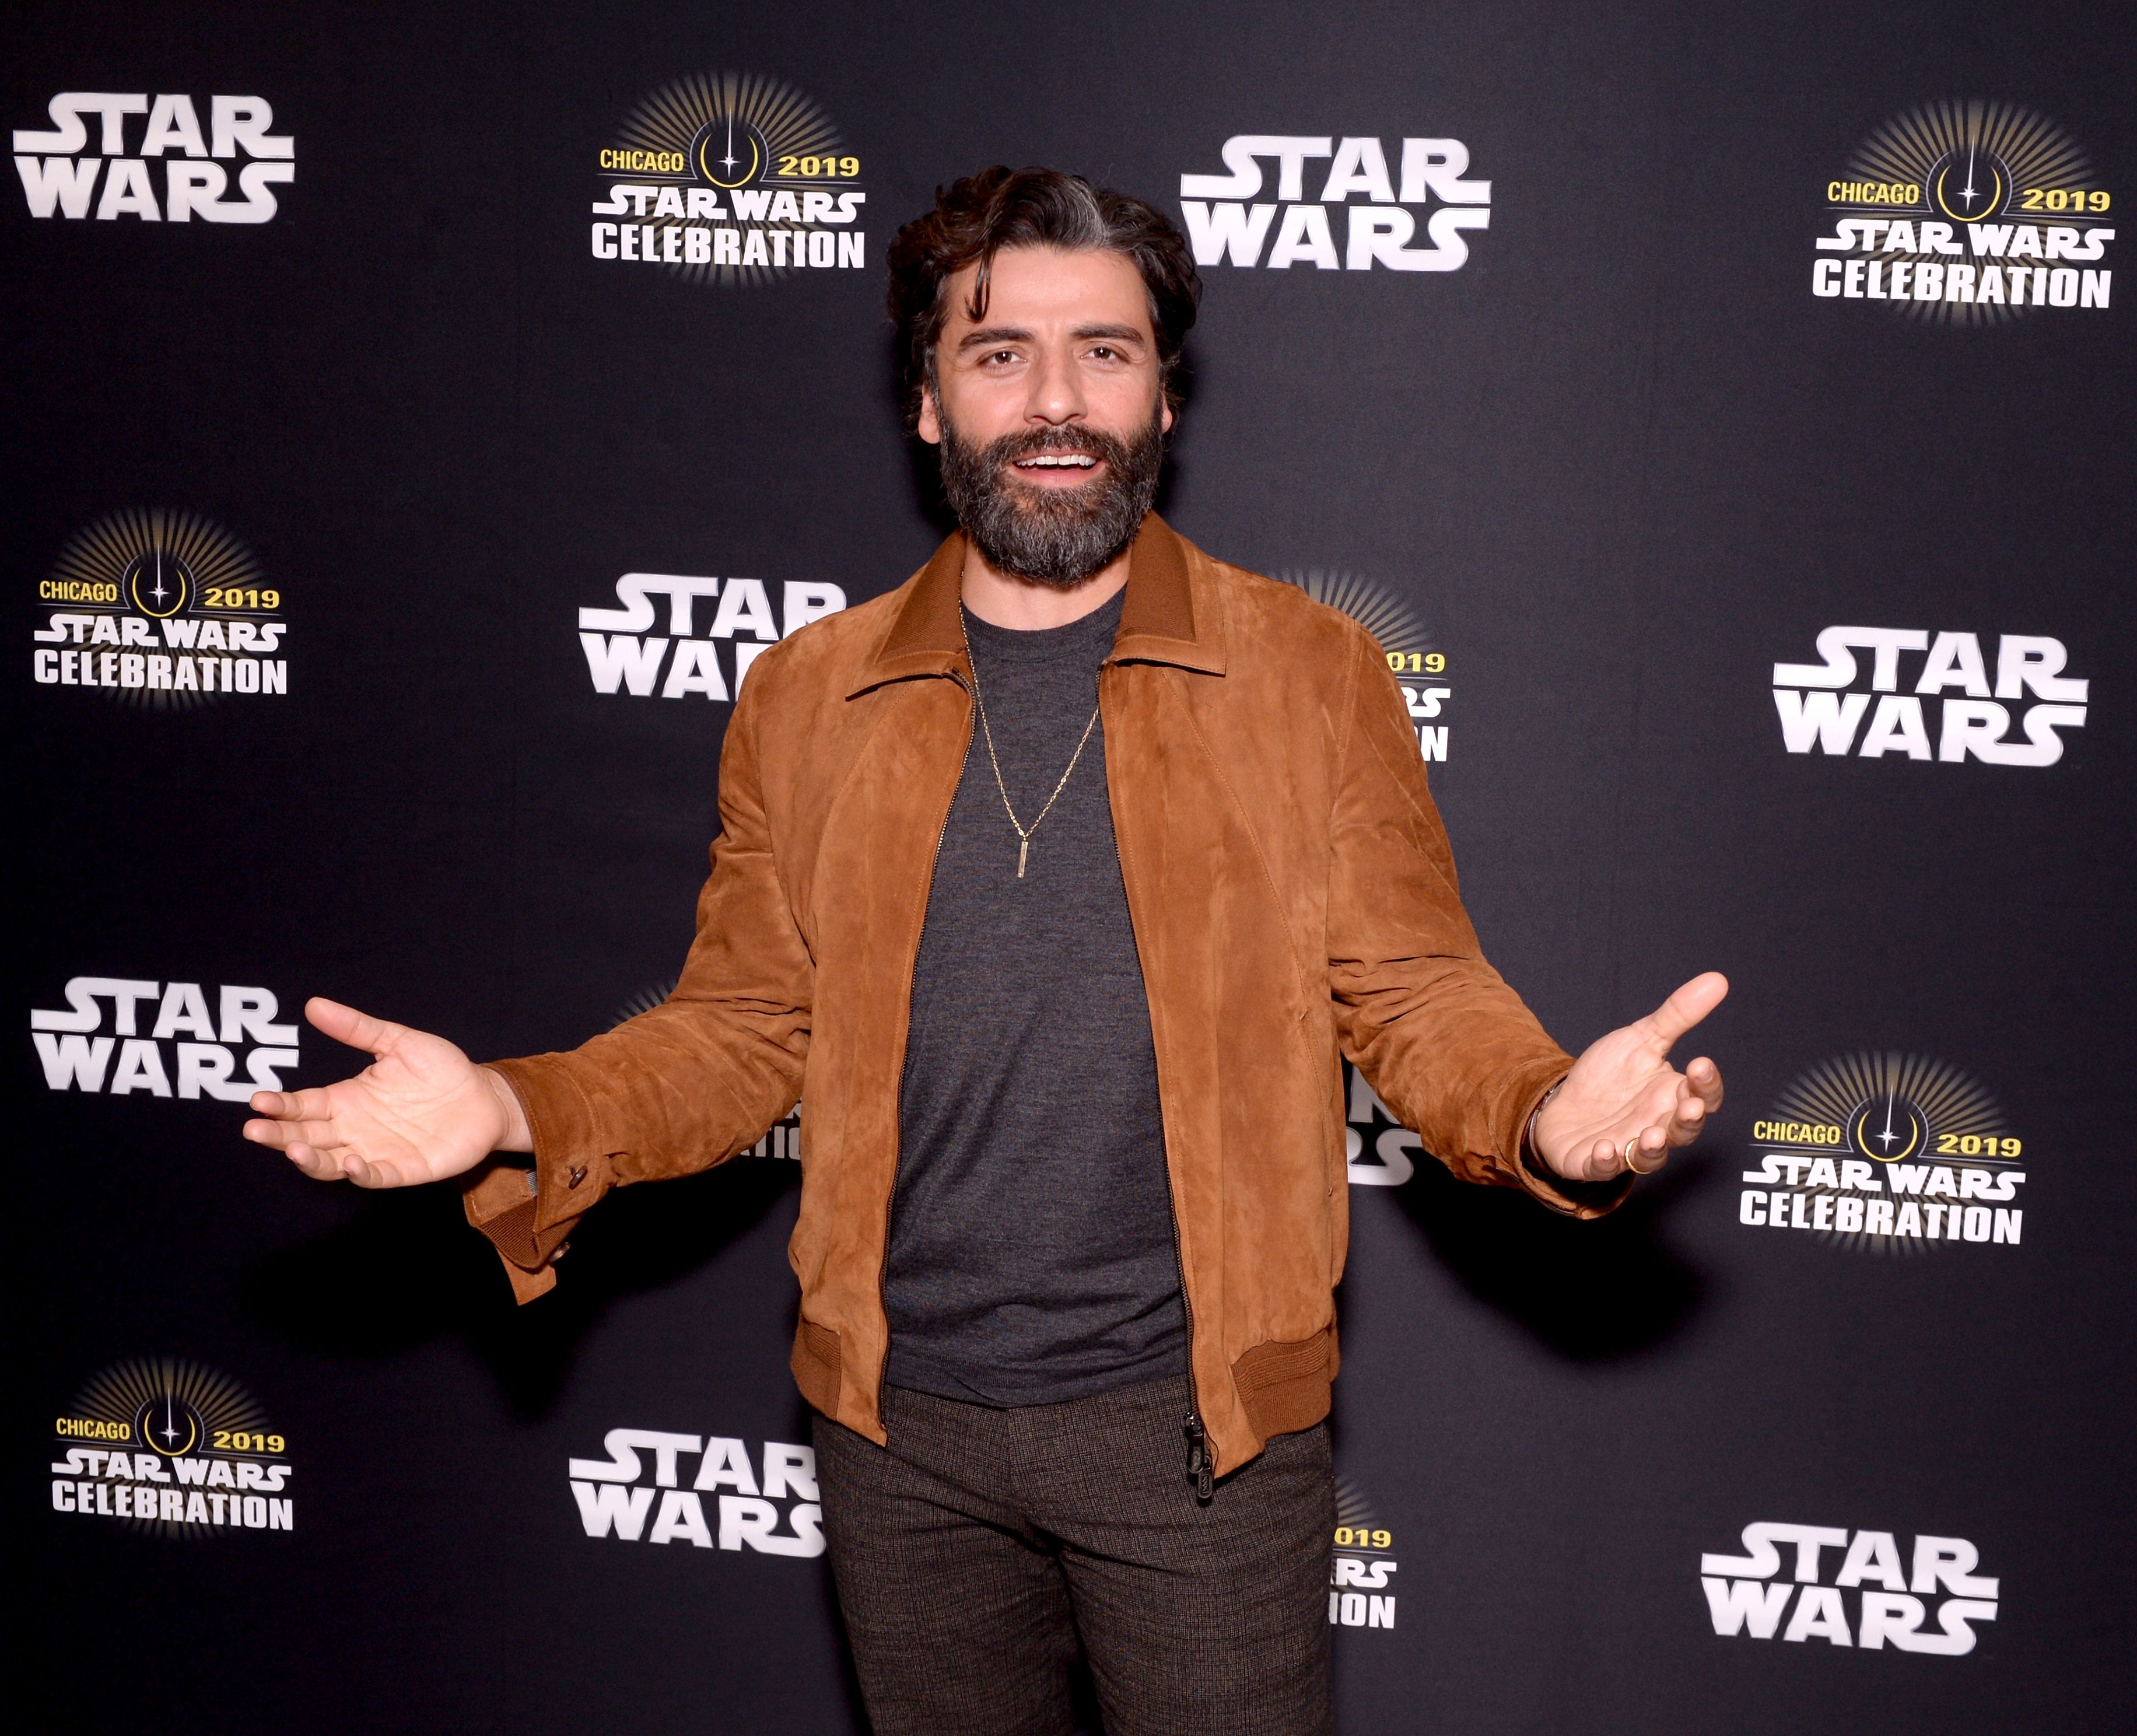 Oscar Isaac during "The Rise of Skywalker" panel at the Star Wars Celebration at McCormick Place Convention Center on April 12, 2019 in Chicago, Illinois. | Source: Getty Images